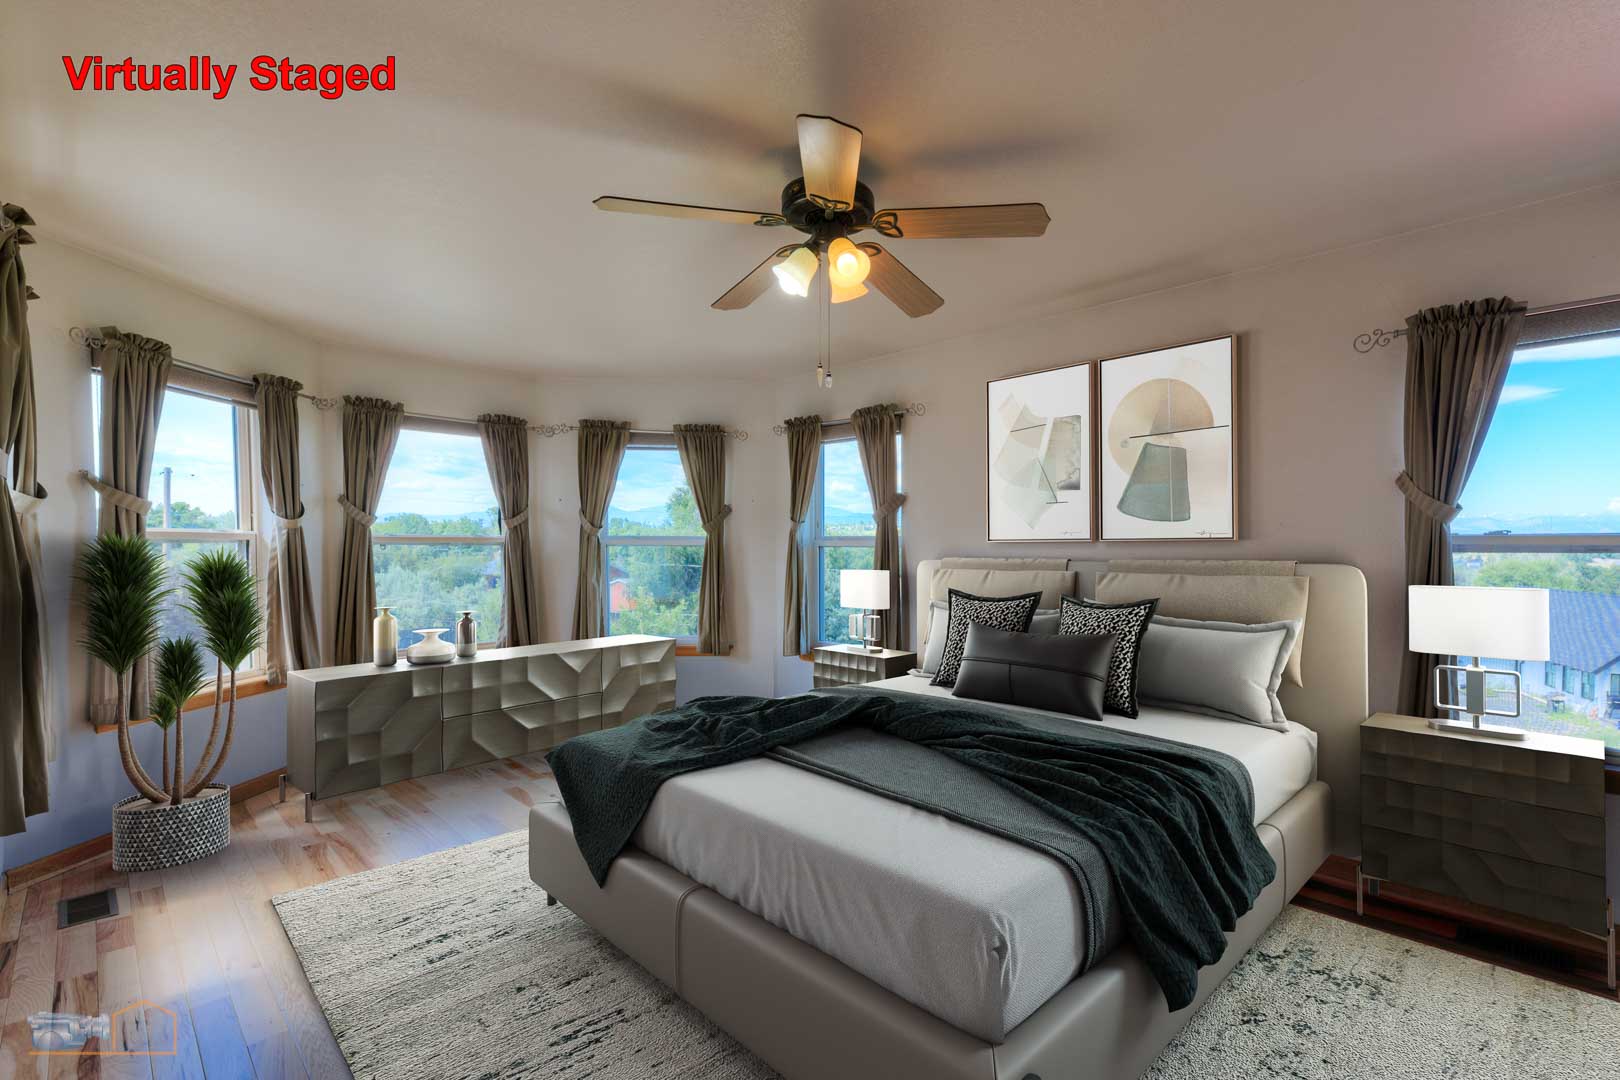 0356 27a Primary Bedroom1 5TMDE RVT3 AD 30 07 23 22 00 Print Web - Virtual Staging